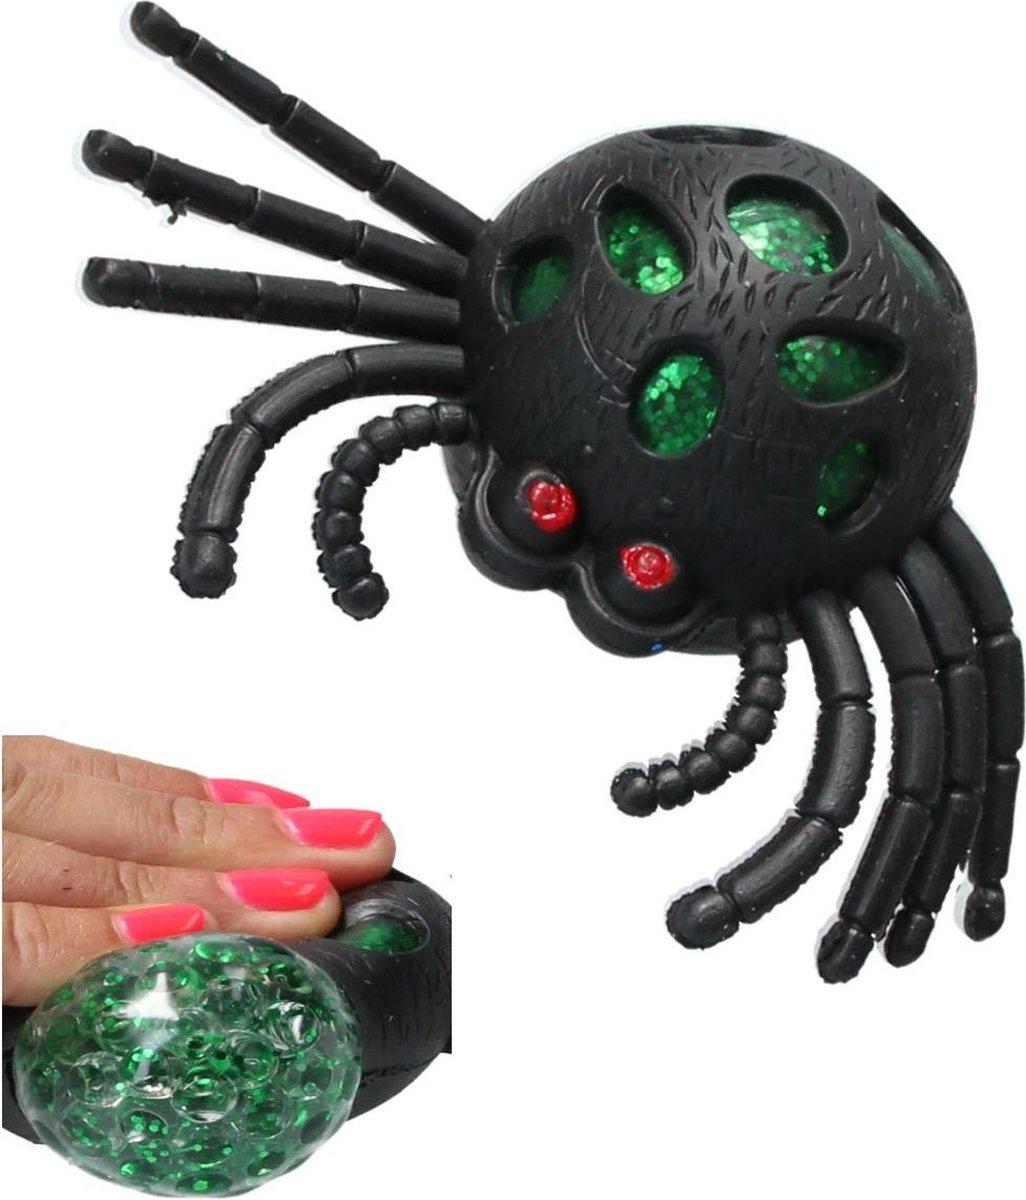 Squeeze ball spider glitter and slime - Balle anti-stress pour la main - 1 pcs